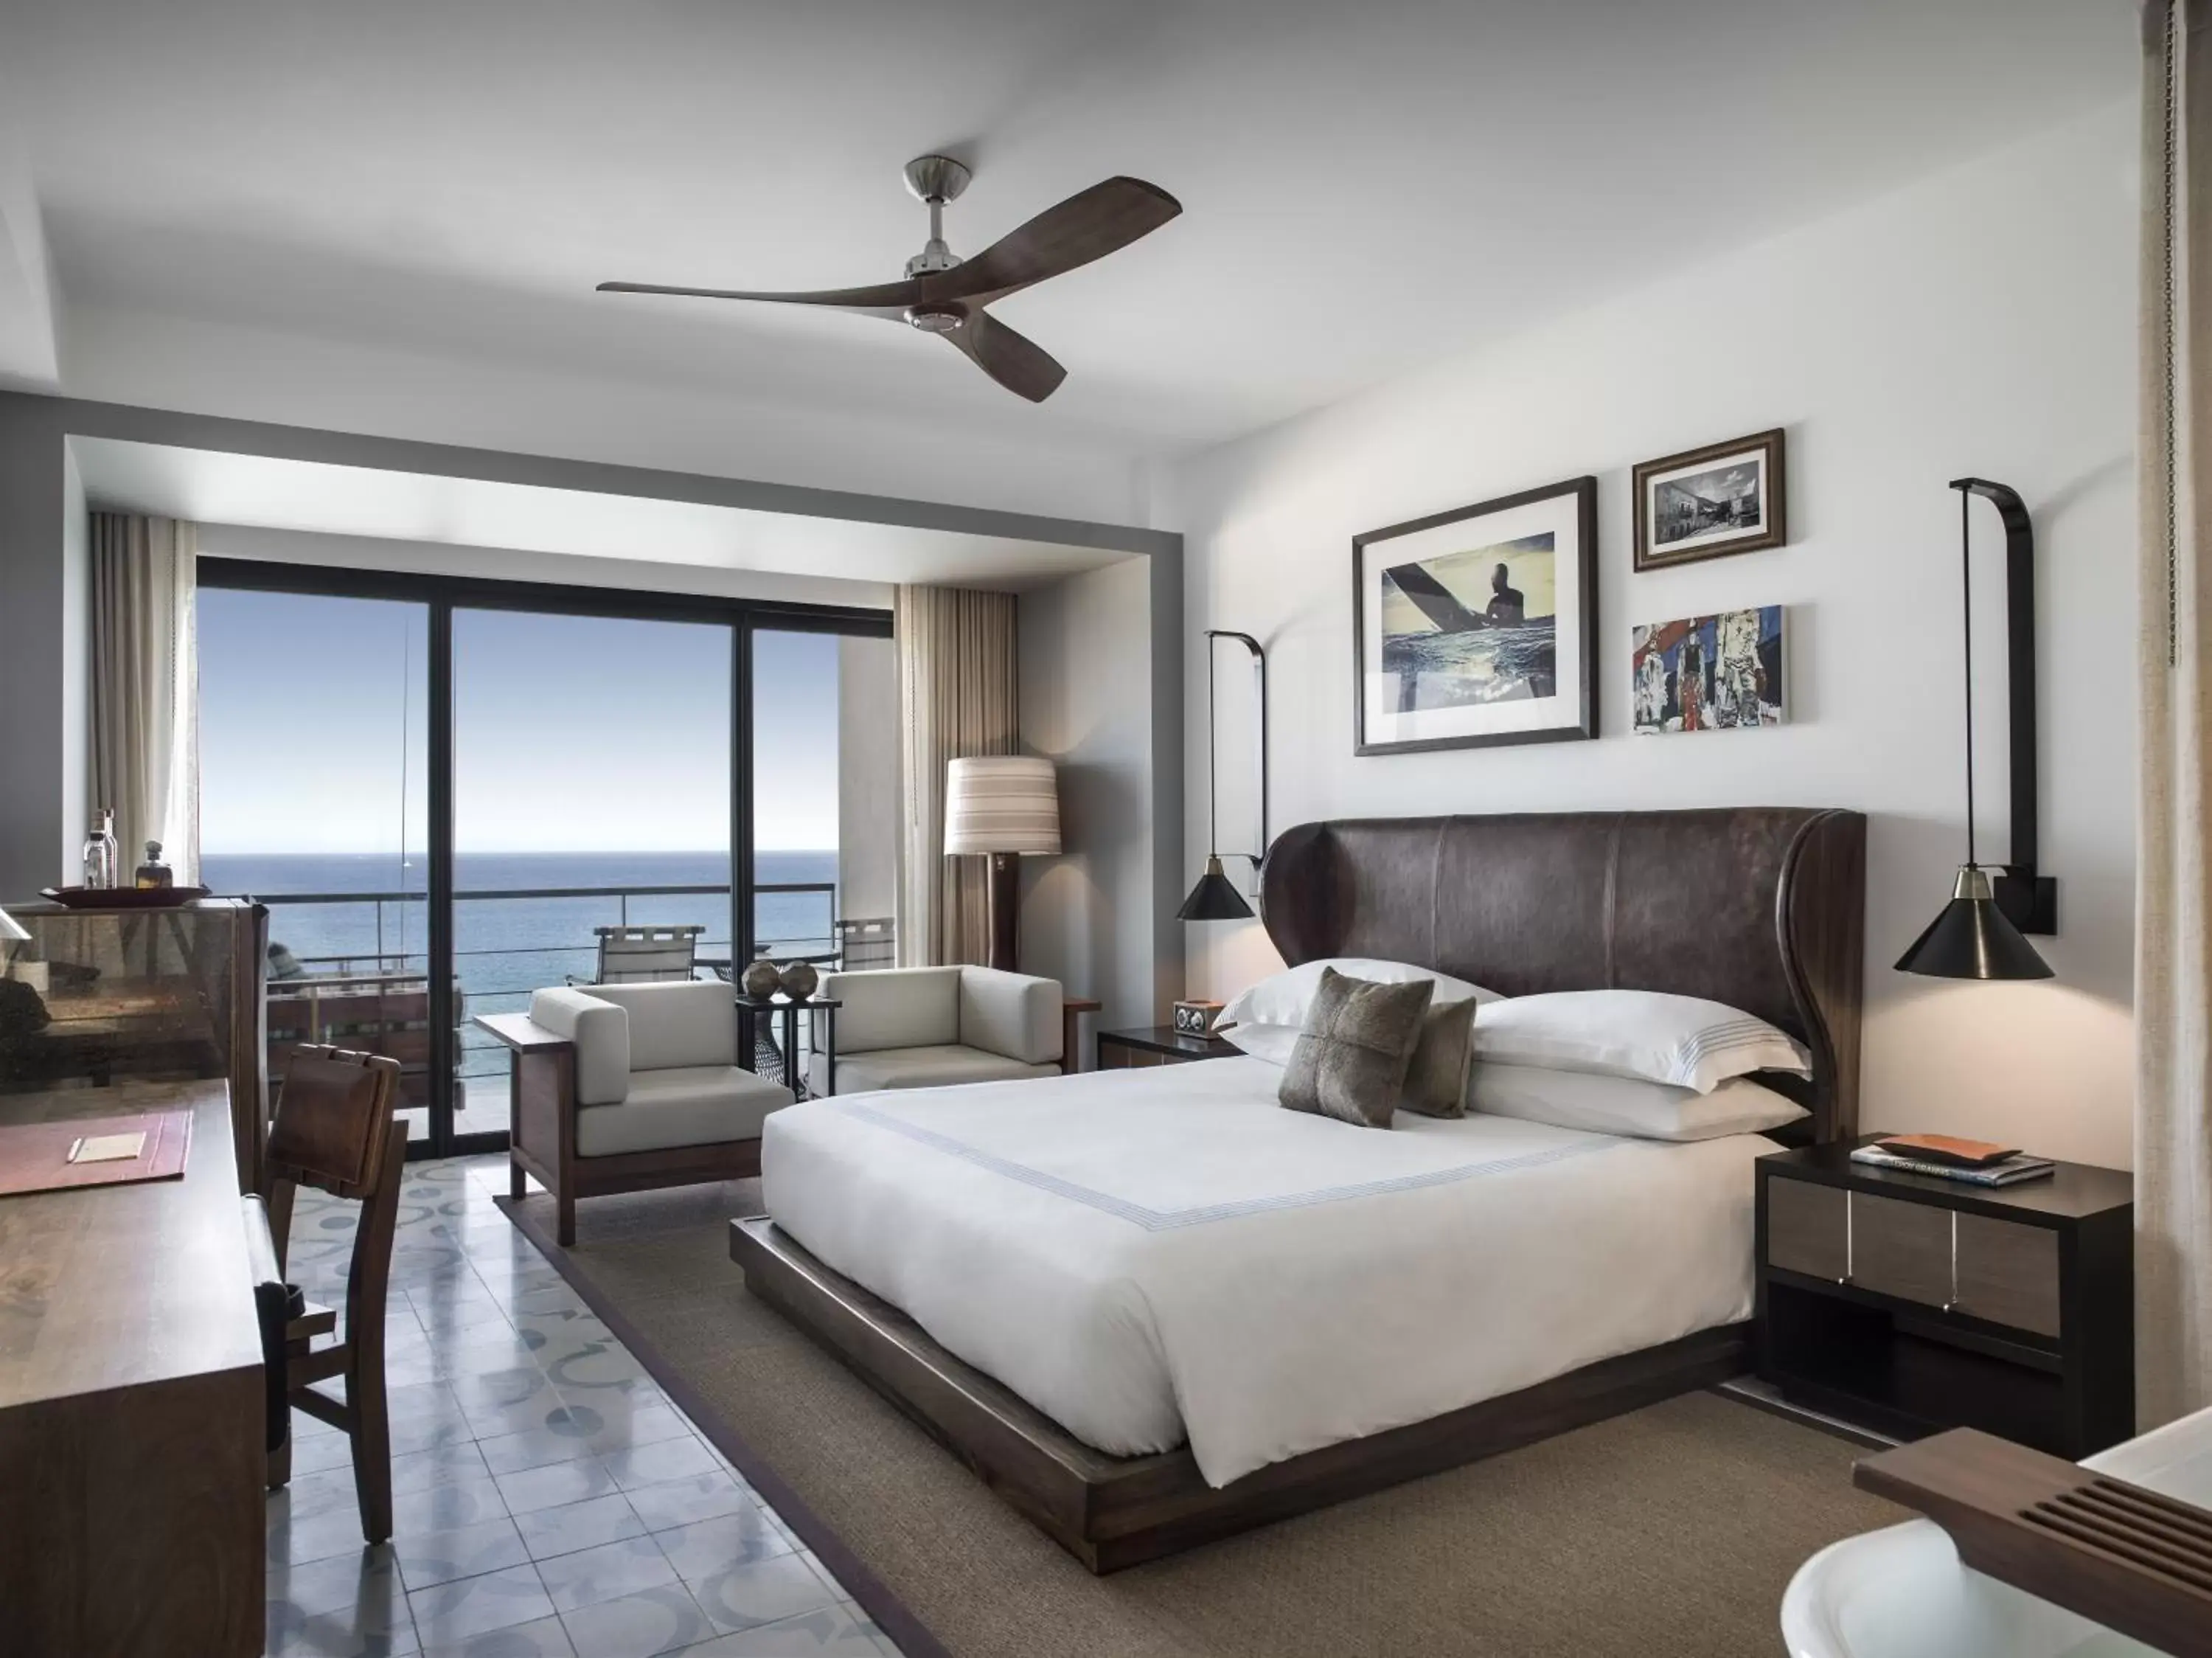 Deluxe King Room with Ocean View in The Cape, a Thompson Hotel, part of Hyatt